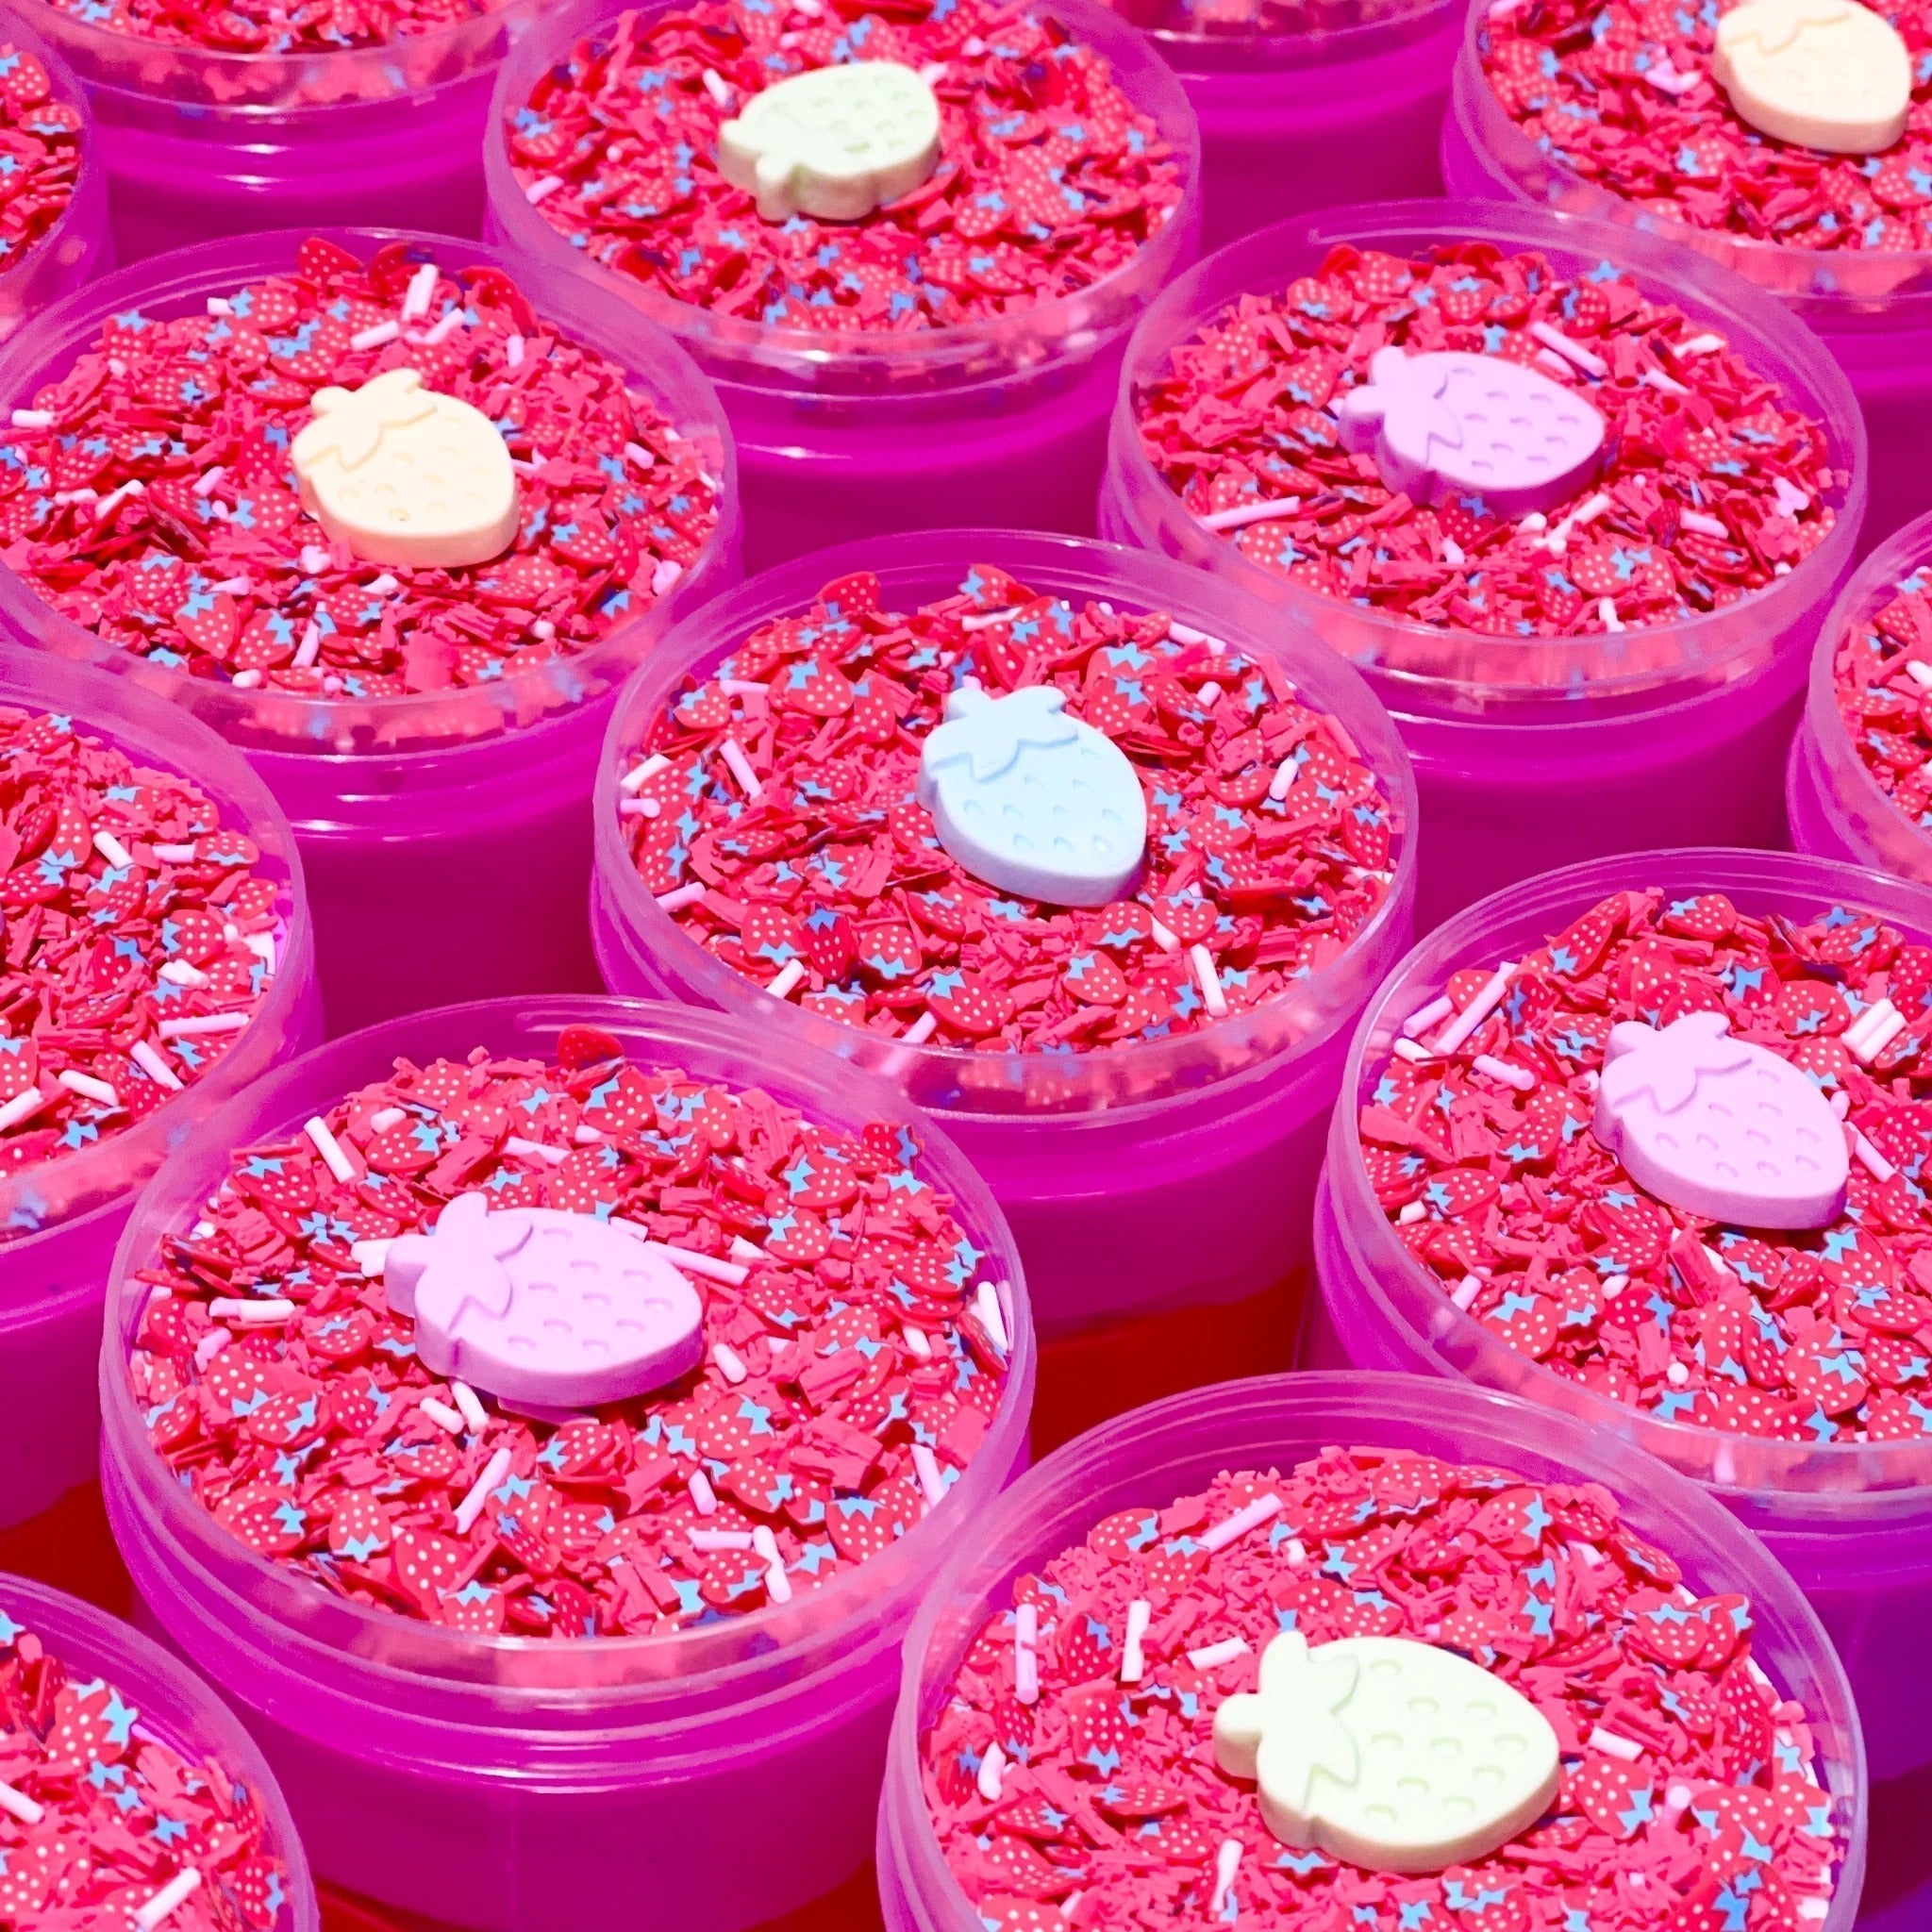 Very Squishberry Putty, Our Very Squishberry putty has three tiers of vibrant pink and red putty, topped with adorable strawberry sprinkles, pastel pink and white floam balls and a strawberry charm to top it off! Putties are air reactive and will dry out of left out. Always return to the container after play with the lid tightly on. Keep away from direct sunlight. Keep away from fabrics and porous surfaces. Container Size: 275ml Ages 5+, Adult supervision recommended. Very Squishberry Putty Washing hands th